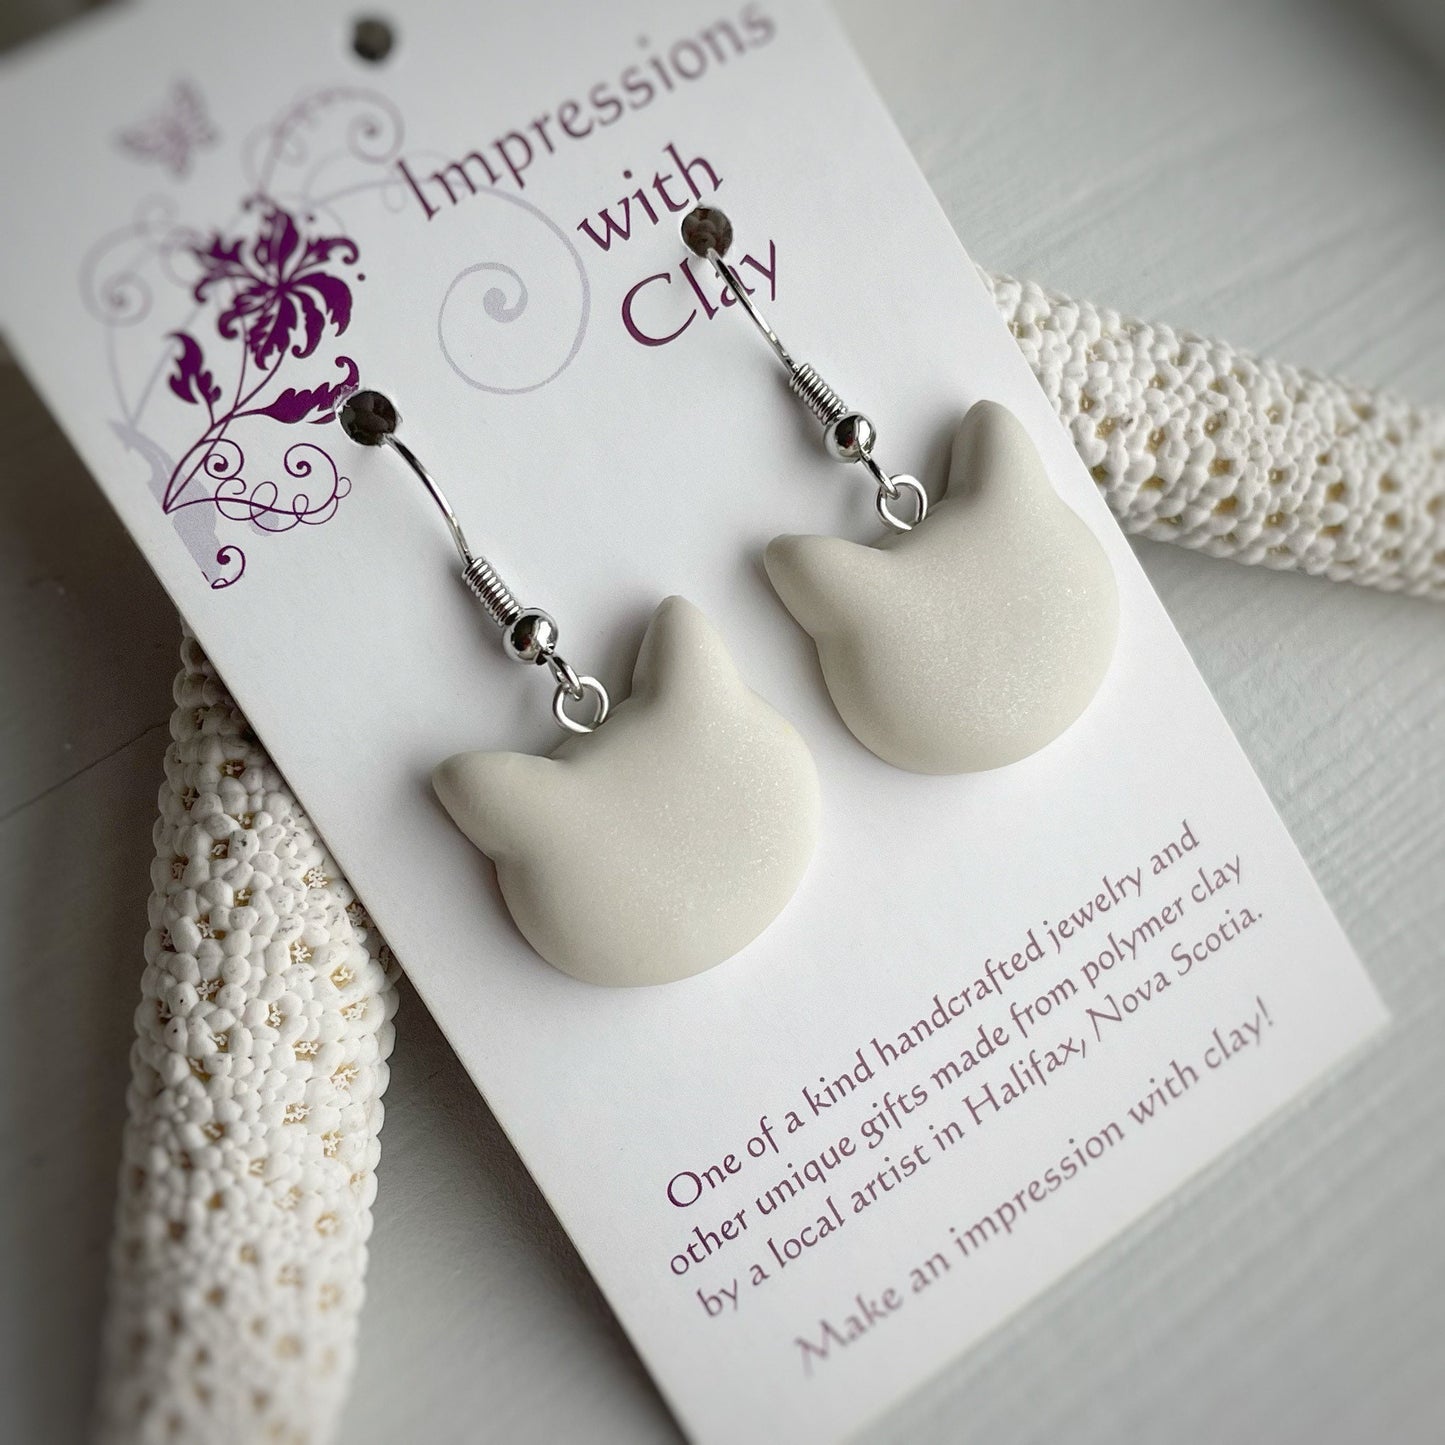 Plain White Drop Cat Earrings from Impressions with Clay | Polymer Clay